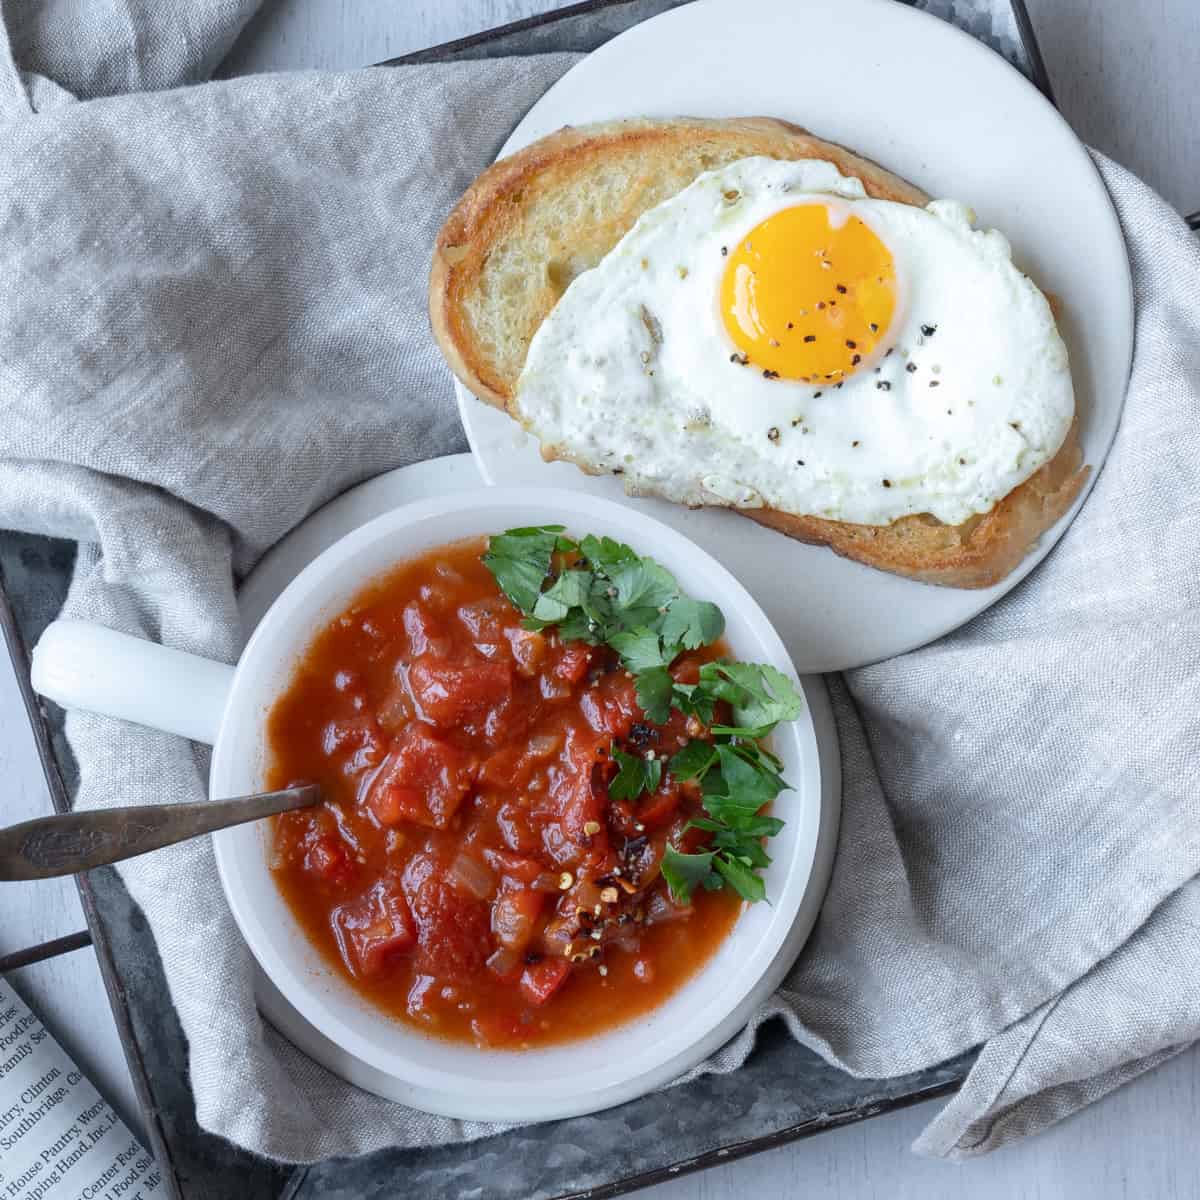 Bowl of thick tomato soup with fried egg on bread.